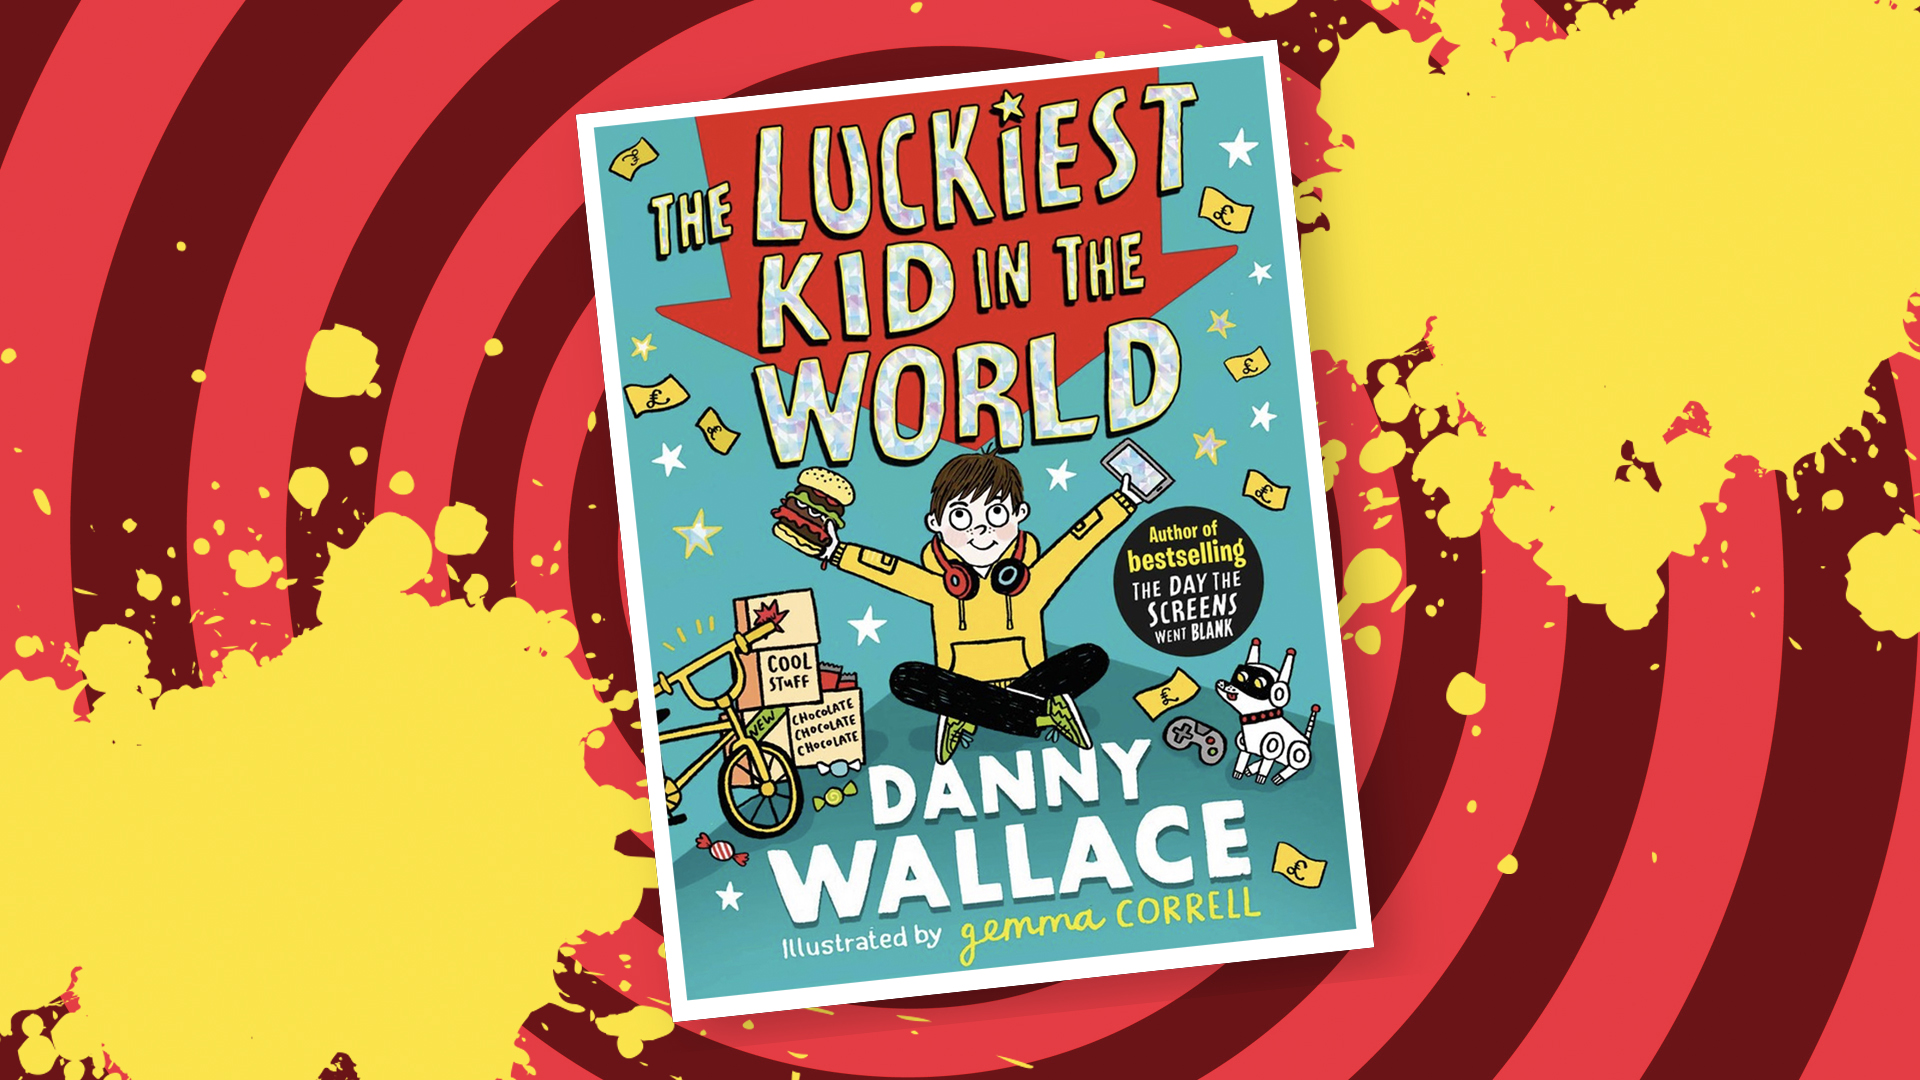 Danny Wallace’s book The Luckiest Kid in the World